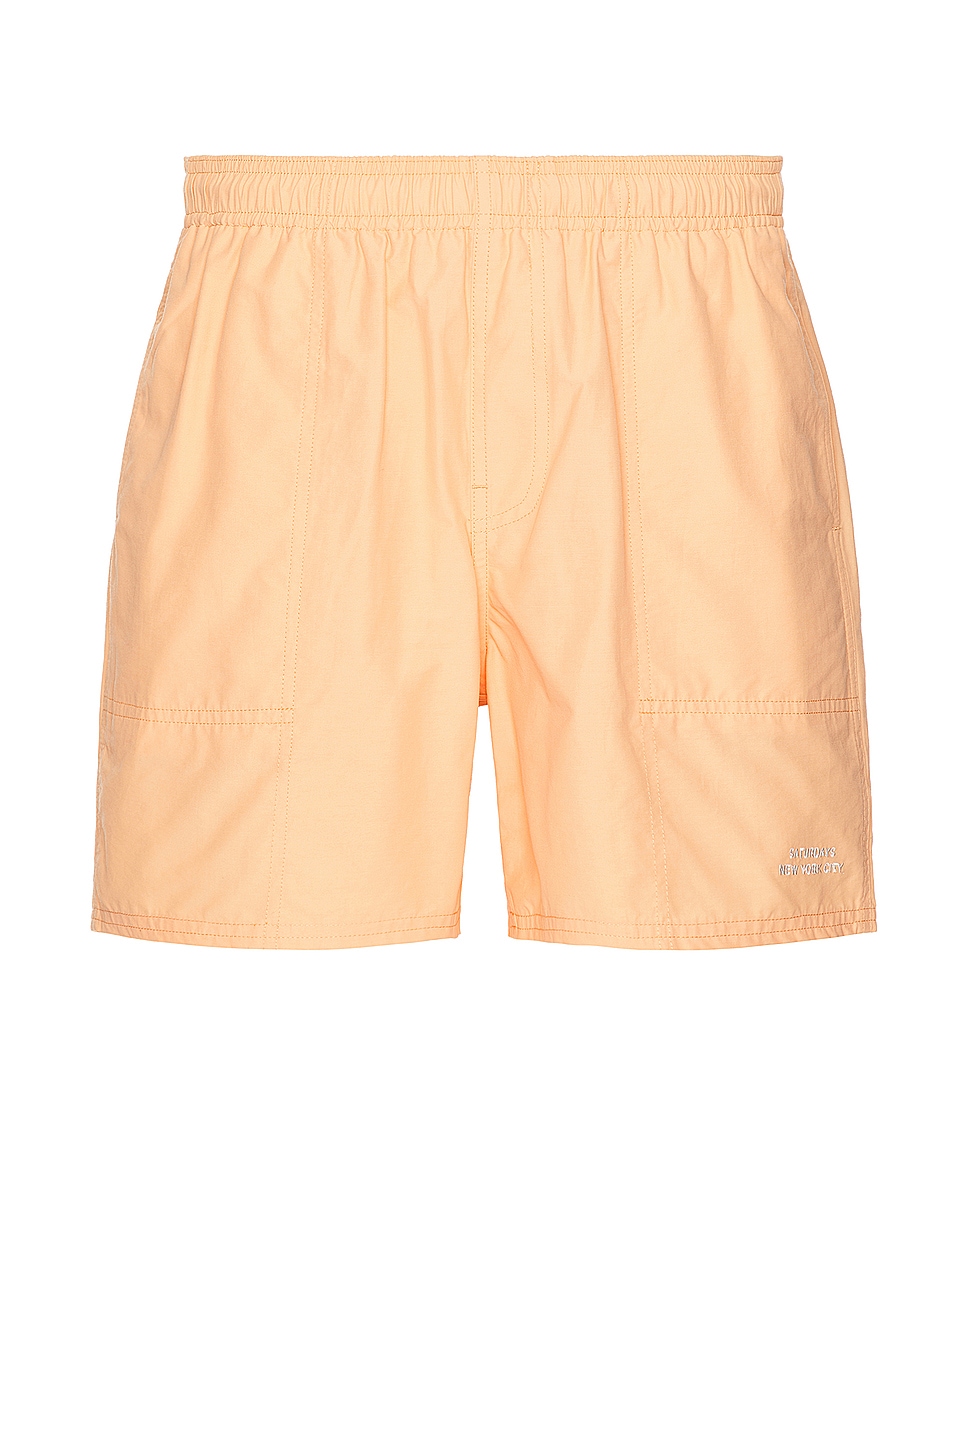 Image 1 of SATURDAYS NYC Talley Swim Short in Apricot Wash